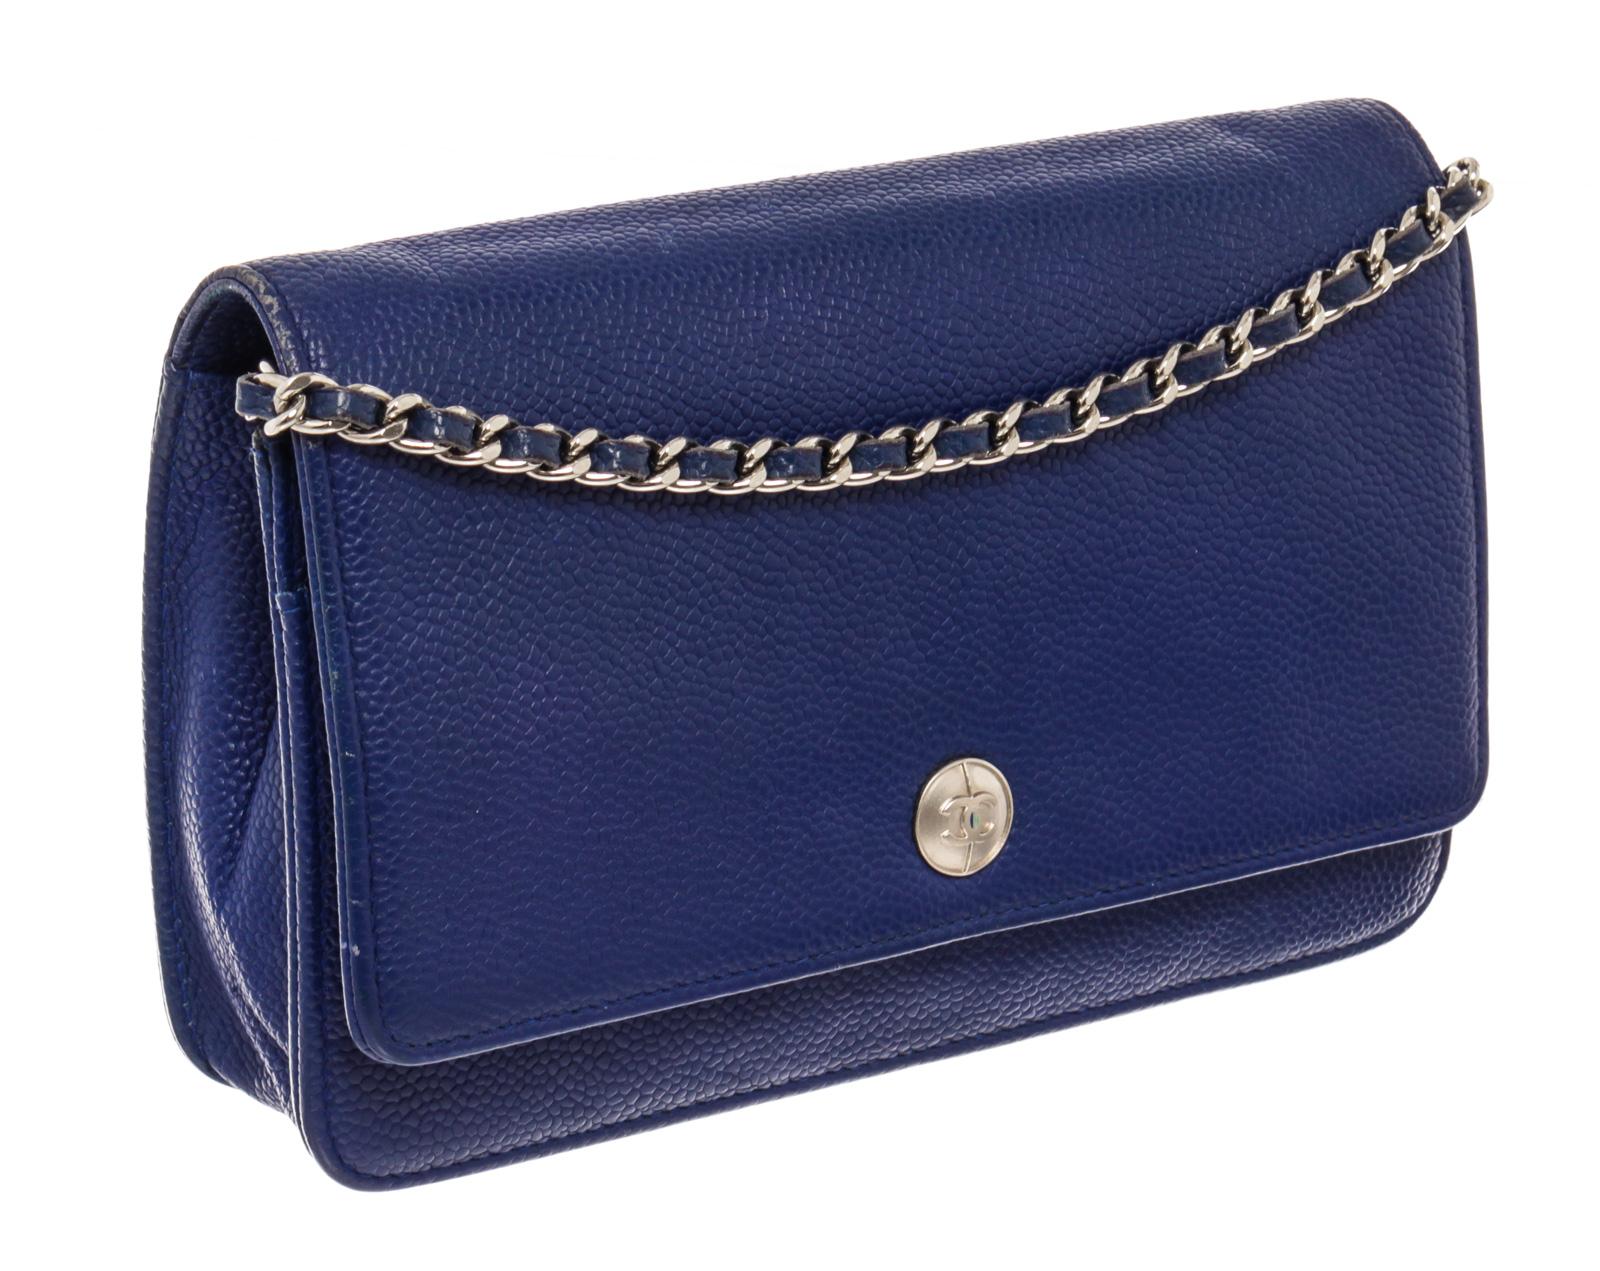 Blue grained Caviar leather Chanel CC Button wallet on chain with silver-tone hardware, a button with interlocking CC logo at the center, front flap with snap closure that will open to aqua green leather-lined interior with one zipped pocket, one